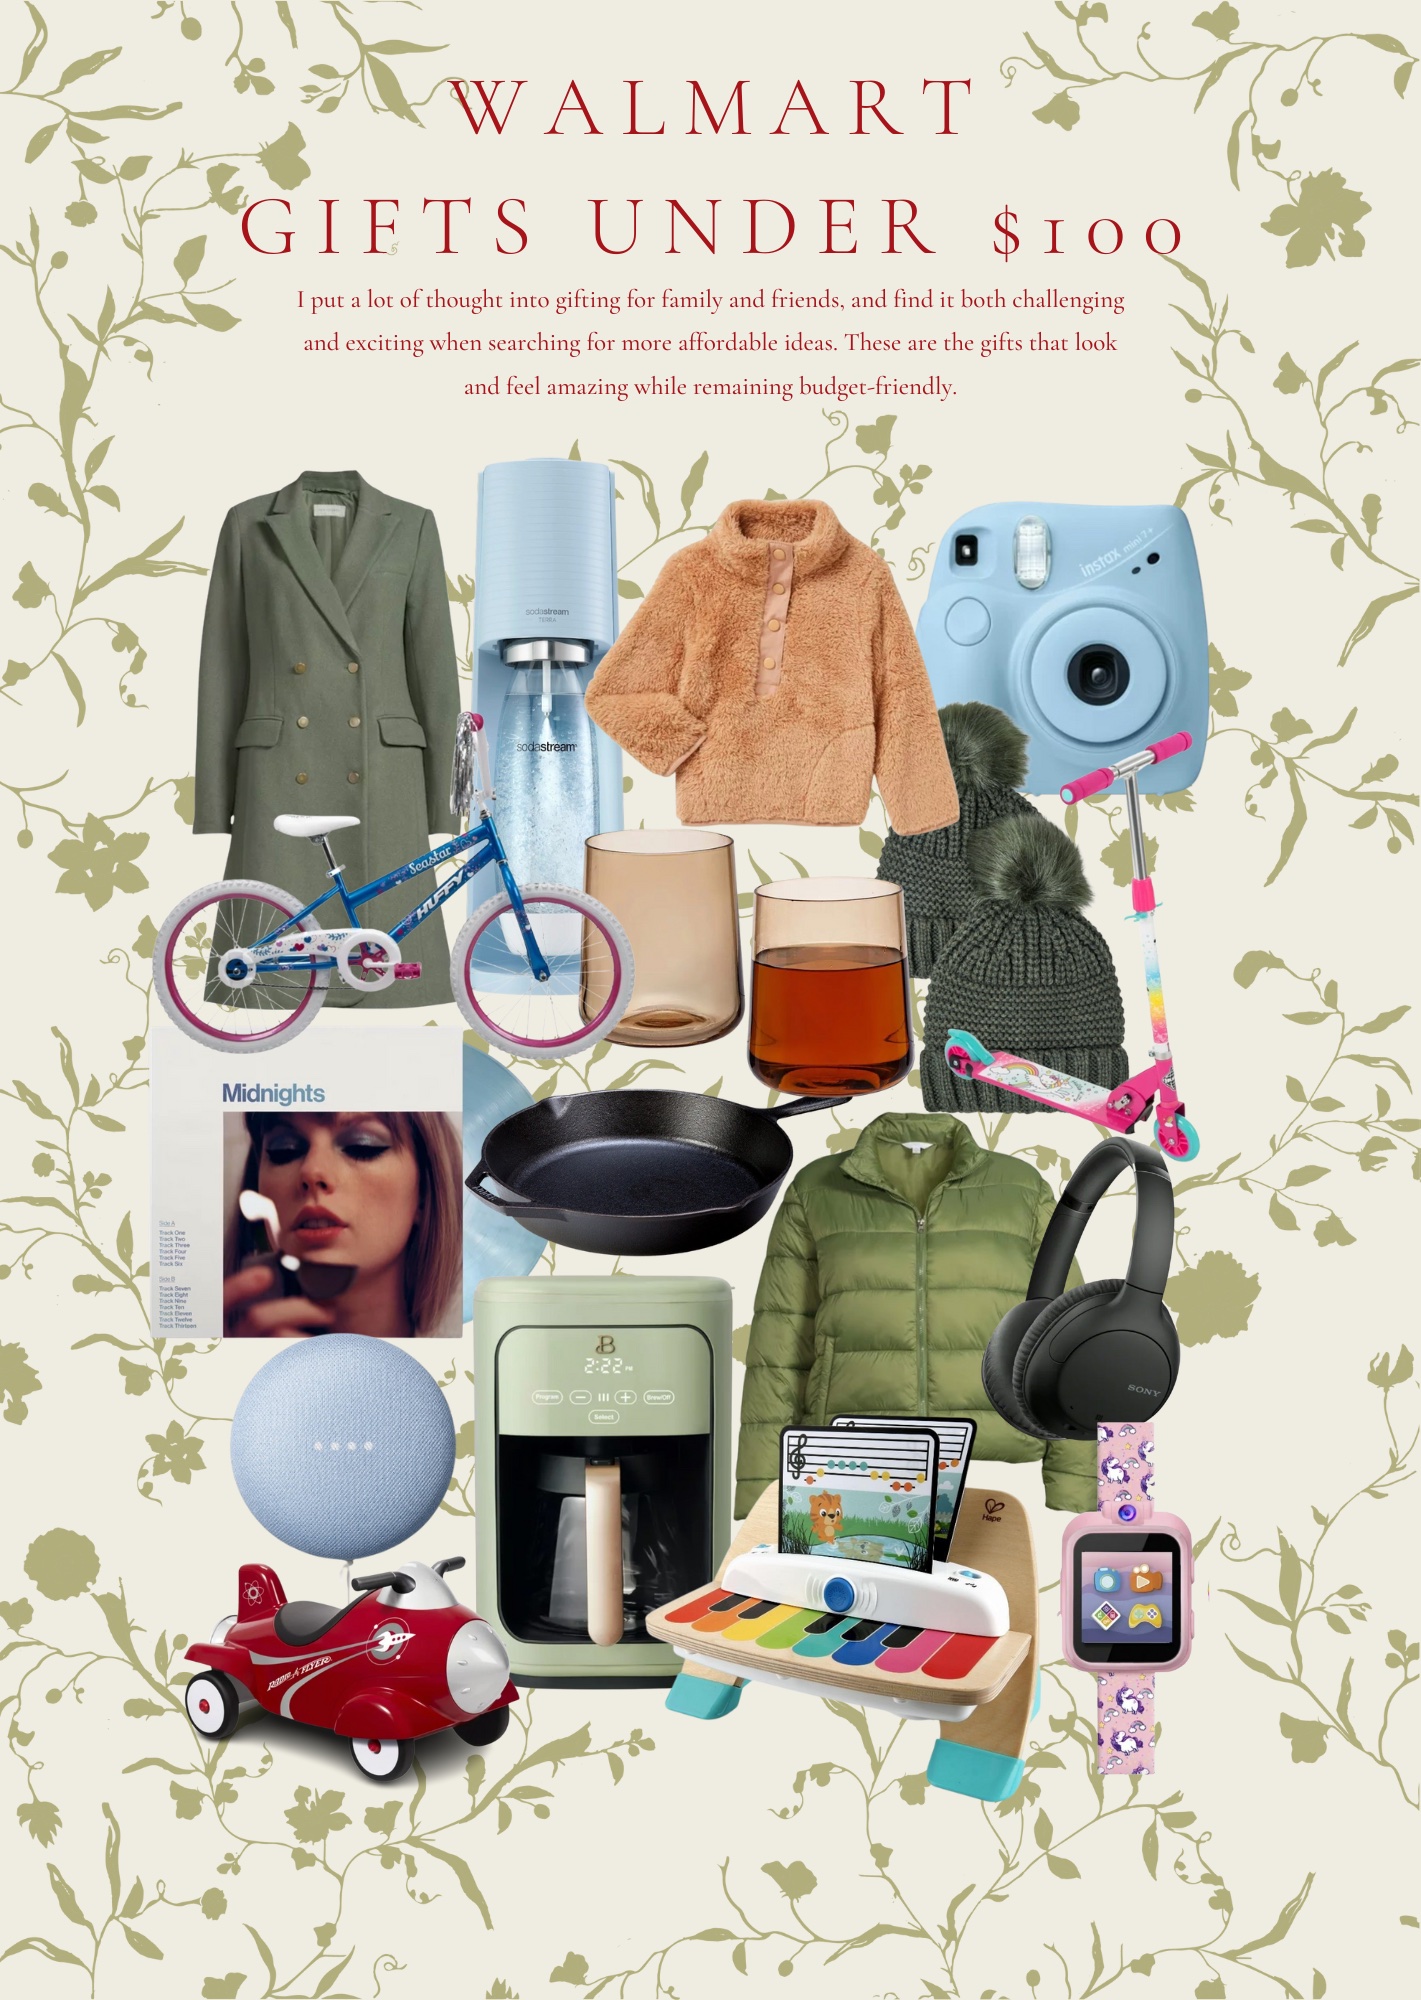 Gifts For The Whole Family Under $100 - Julia Berolzheimer